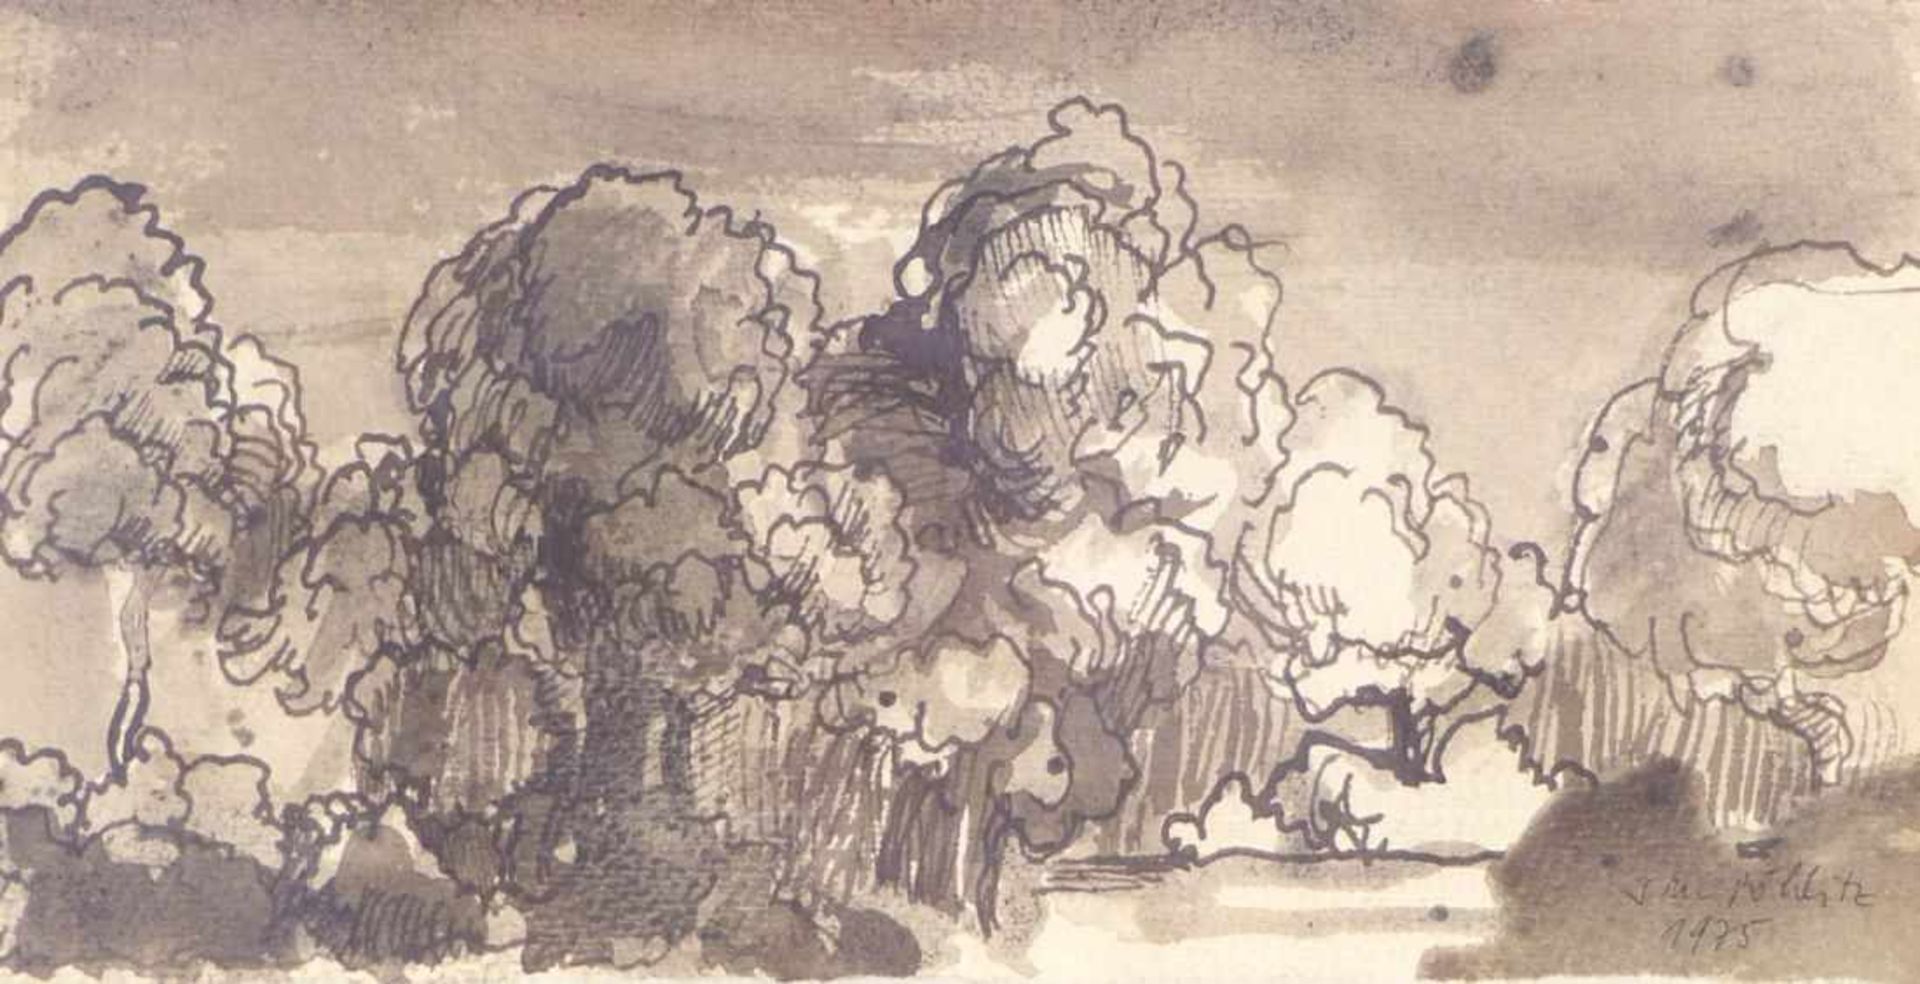 Pöhlitz, RainerLandscape with Deciduous Trees(Born 1952 in Pattenhofen) Ink drawing, washed, on